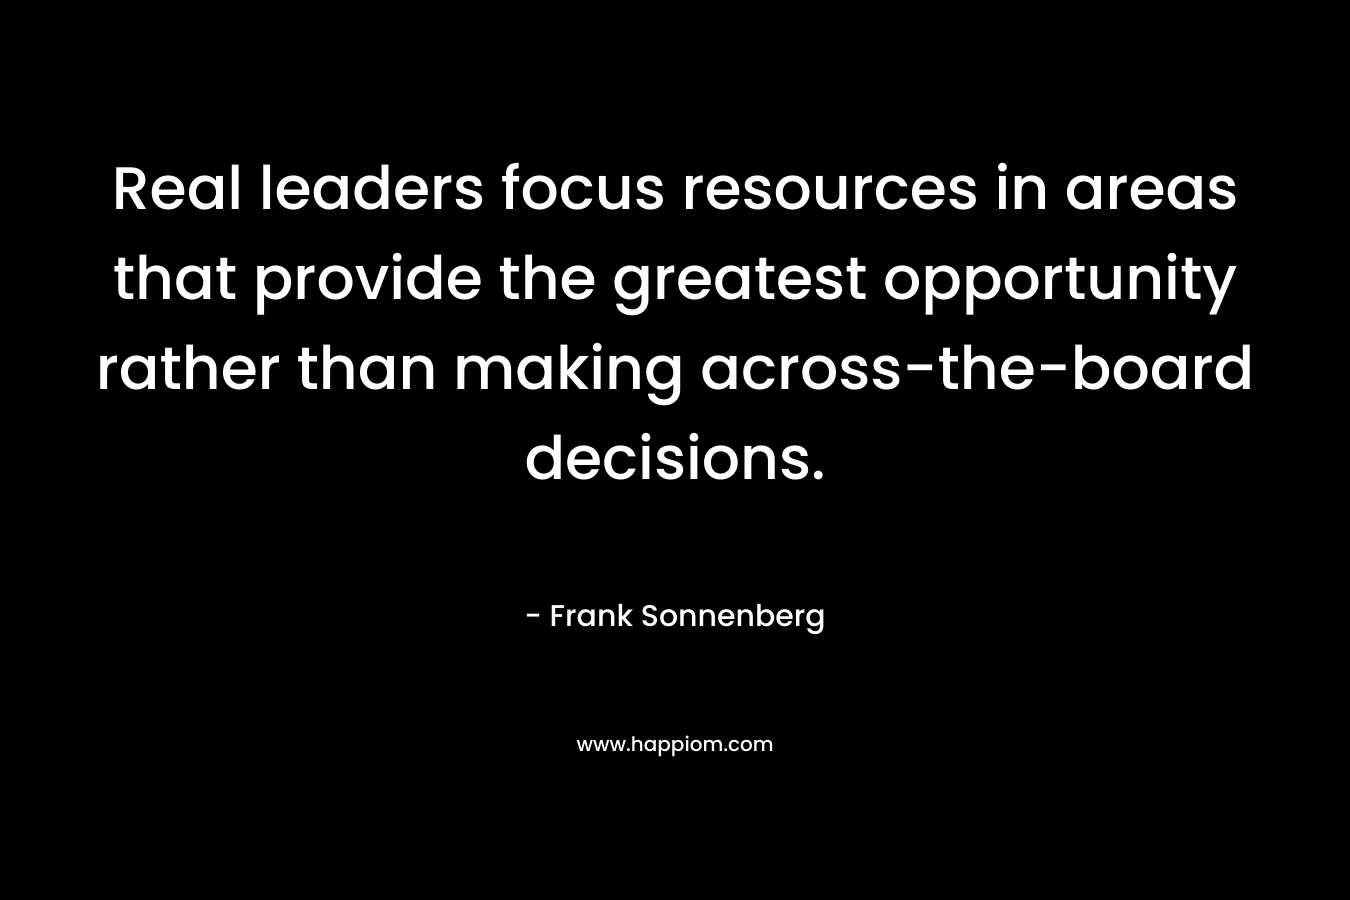 Real leaders focus resources in areas that provide the greatest opportunity rather than making across-the-board decisions. – Frank Sonnenberg